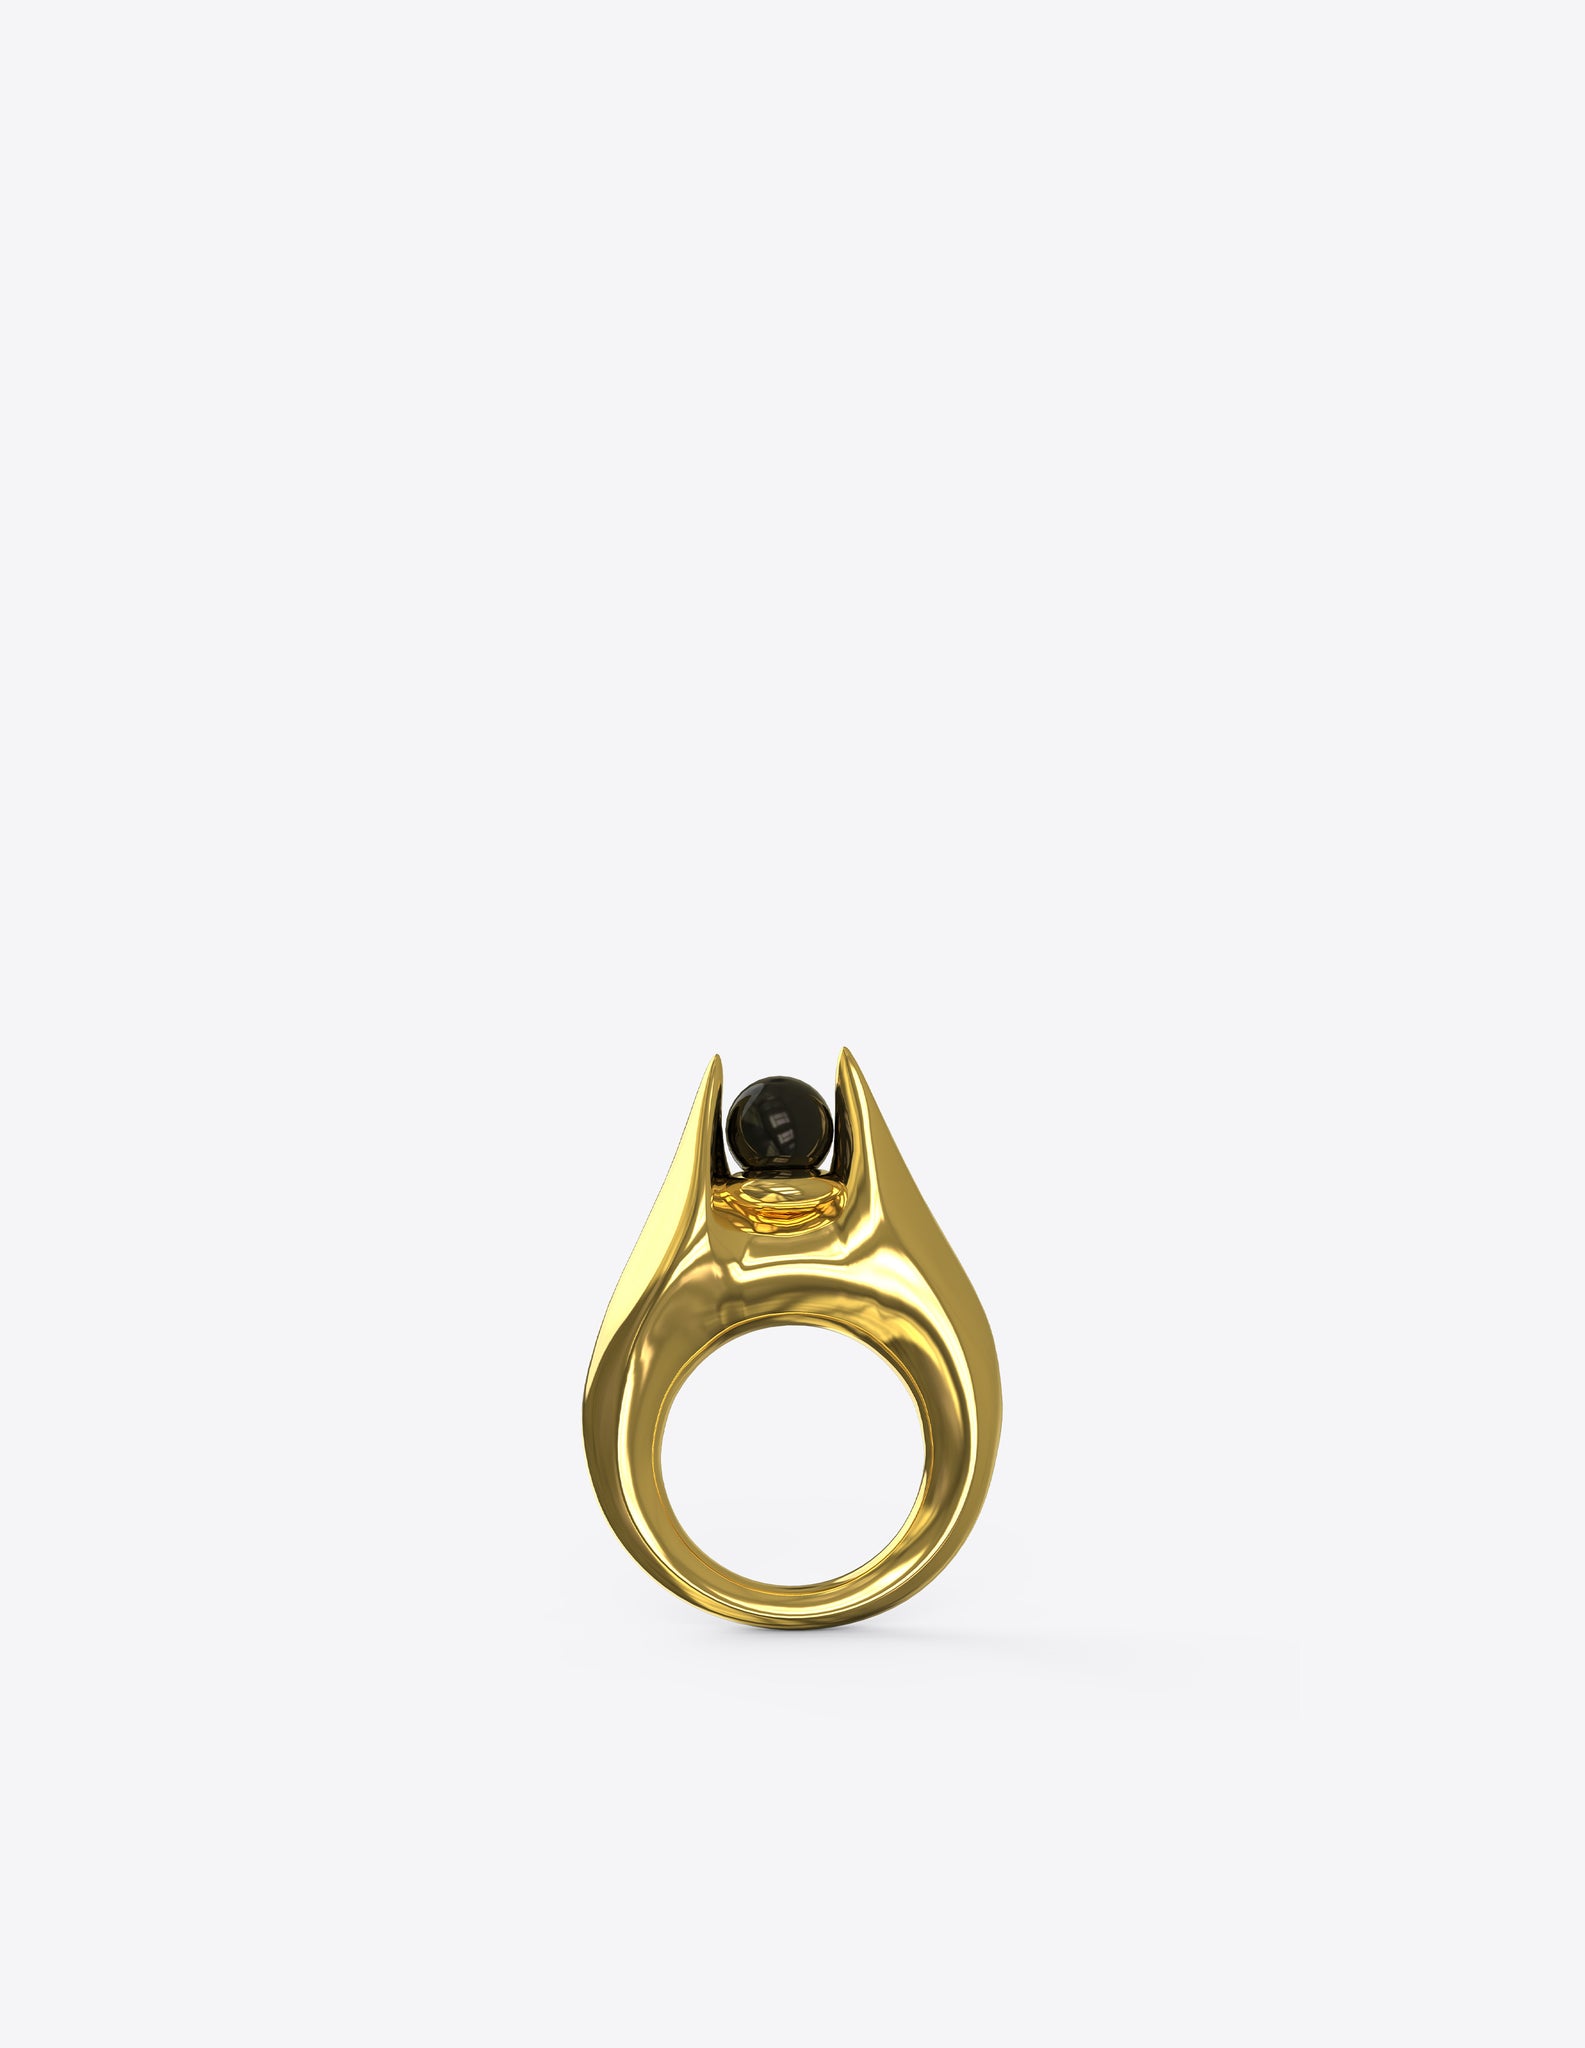 Orb Protection Ring with Black Onyx in Polished 18K Gold Vermeil